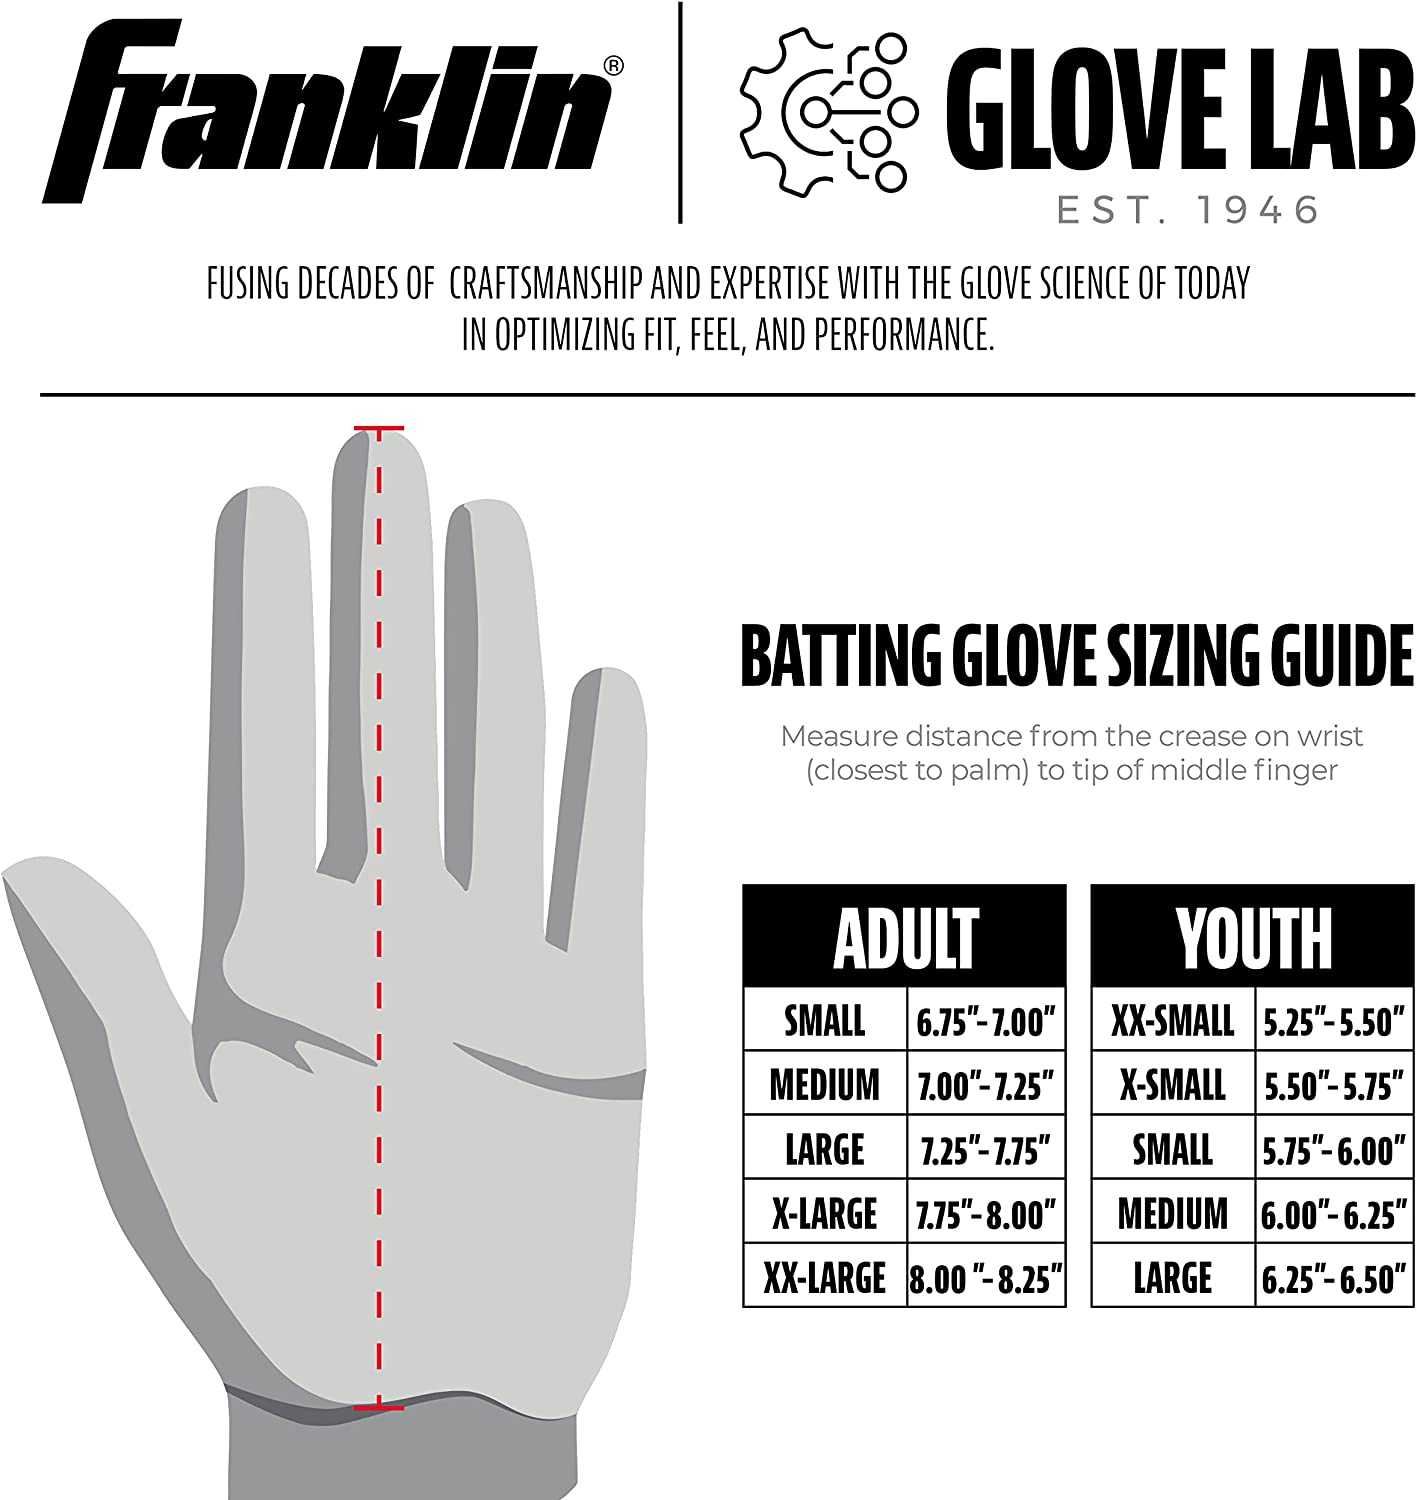 Franklin CFX Pro Adult Batting Glove - Highlight Yellow - HIT a Double - 1